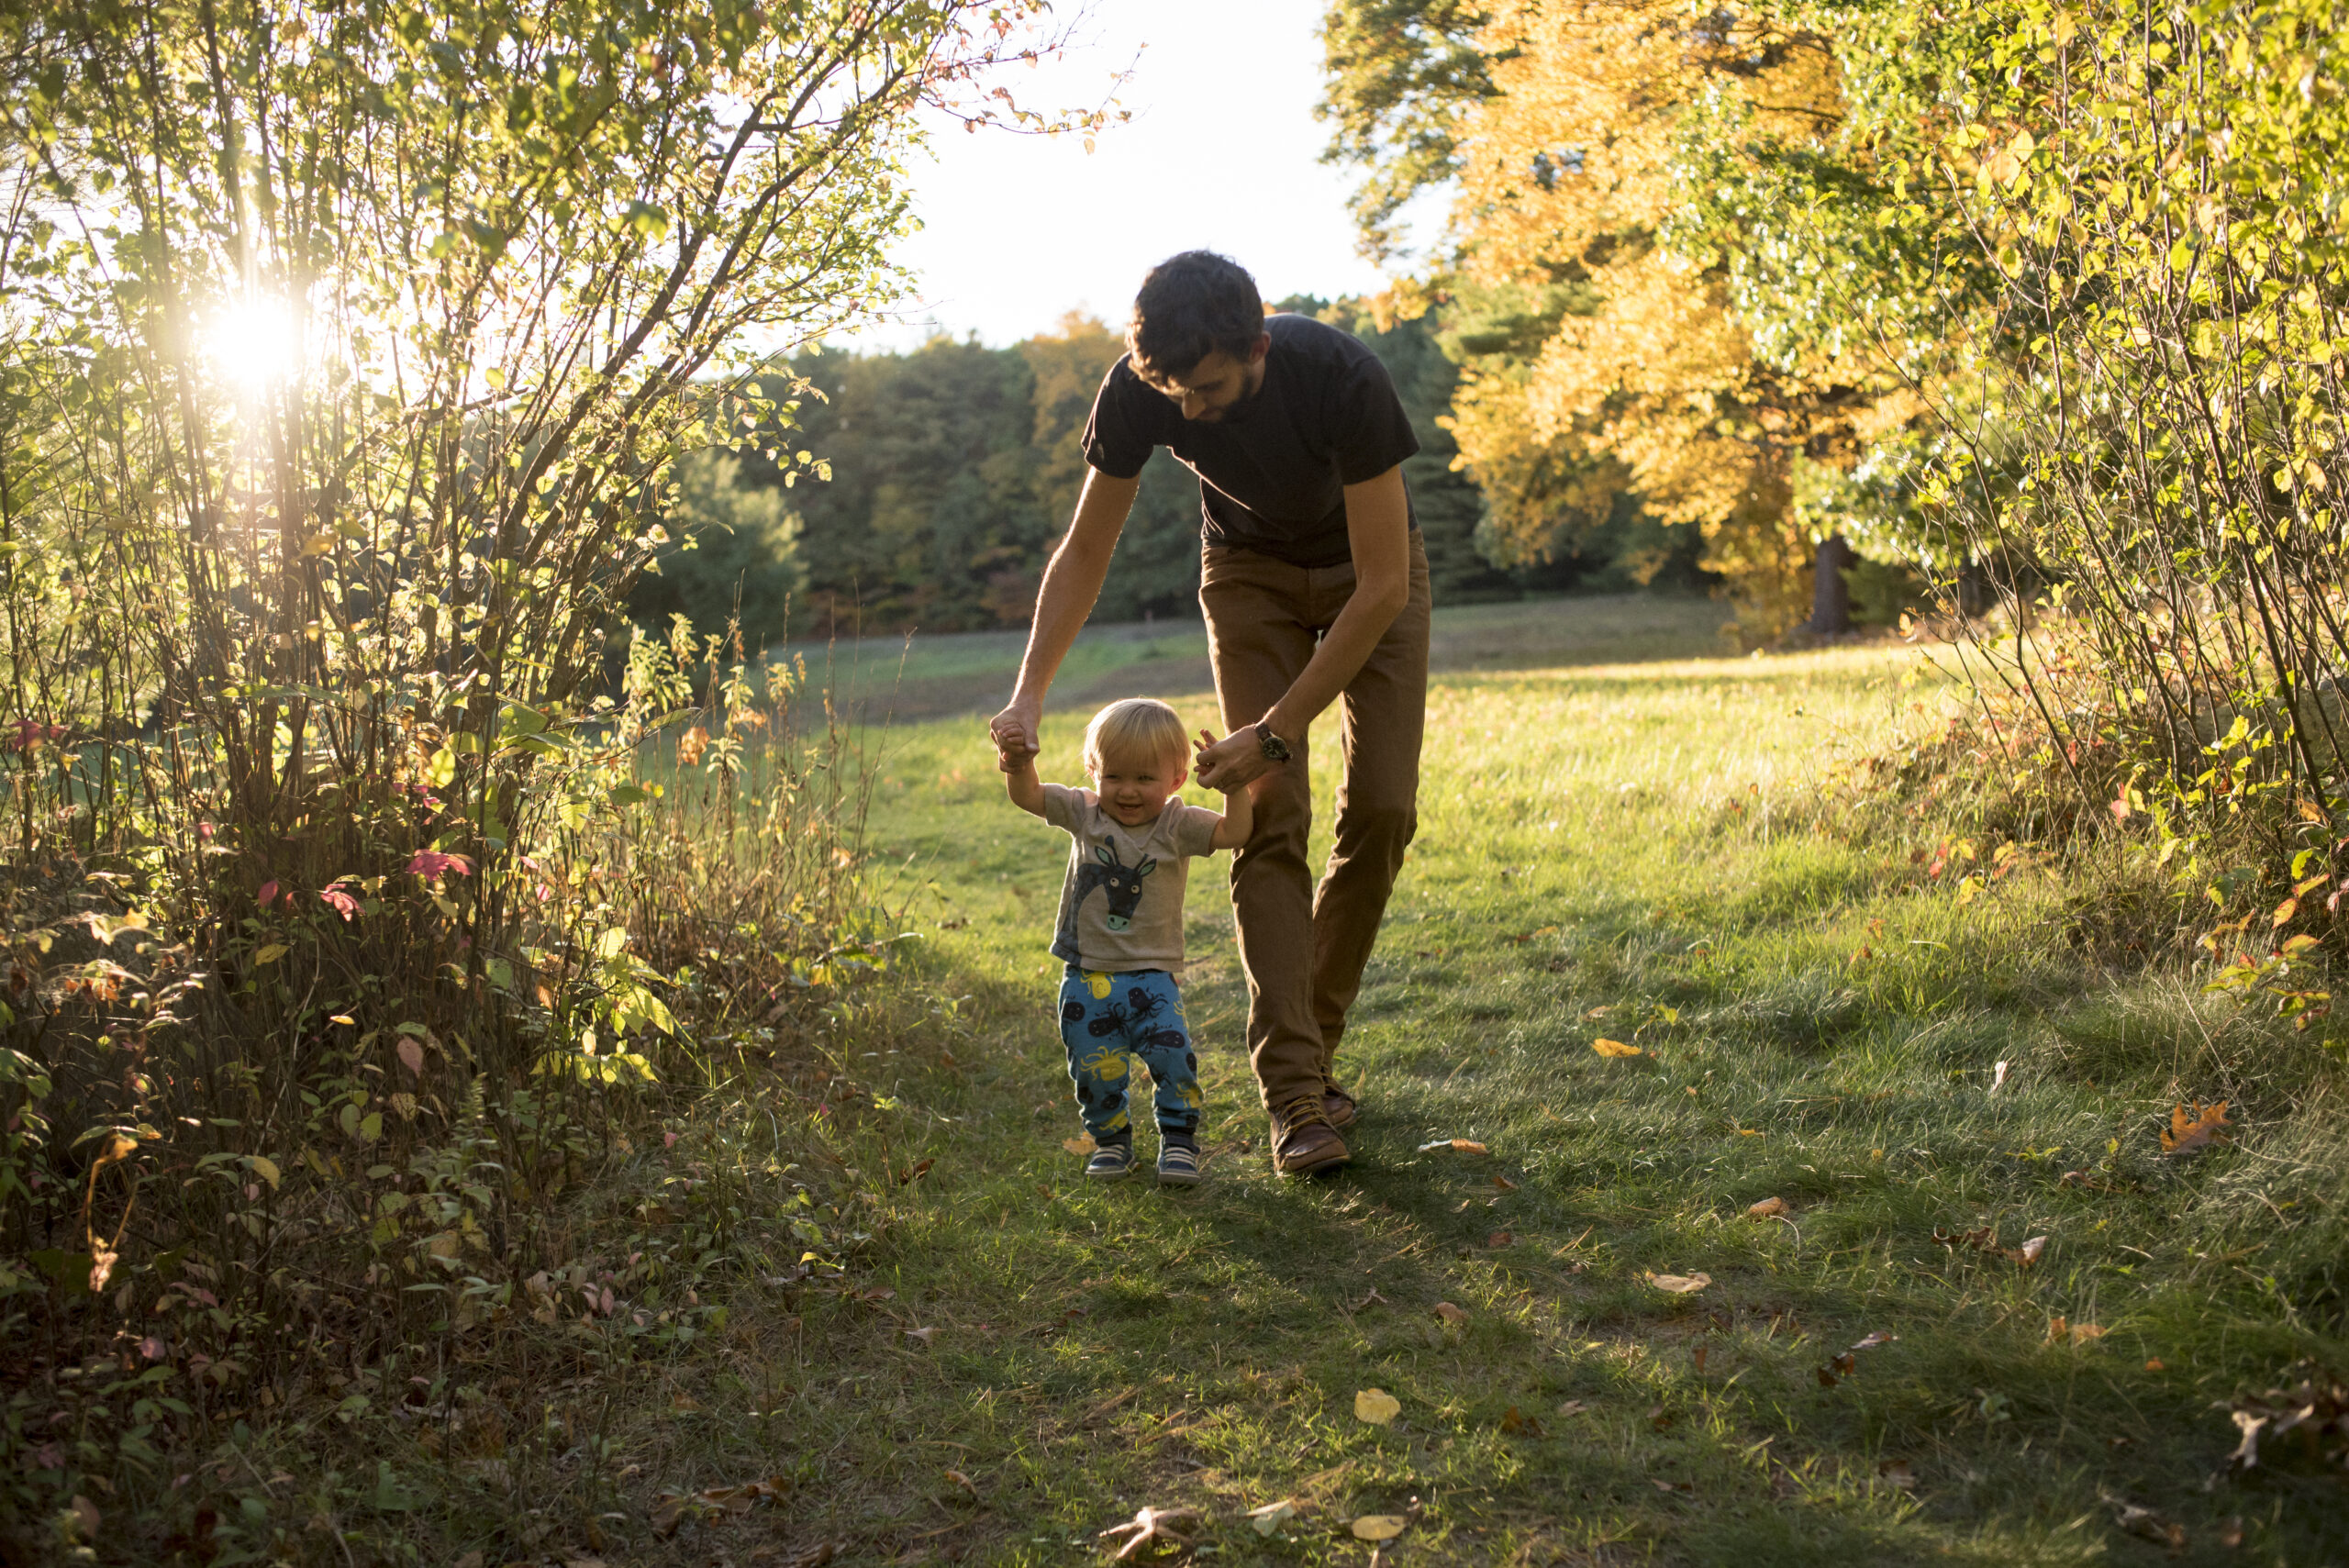 A man and a child walking down a path in the woods.